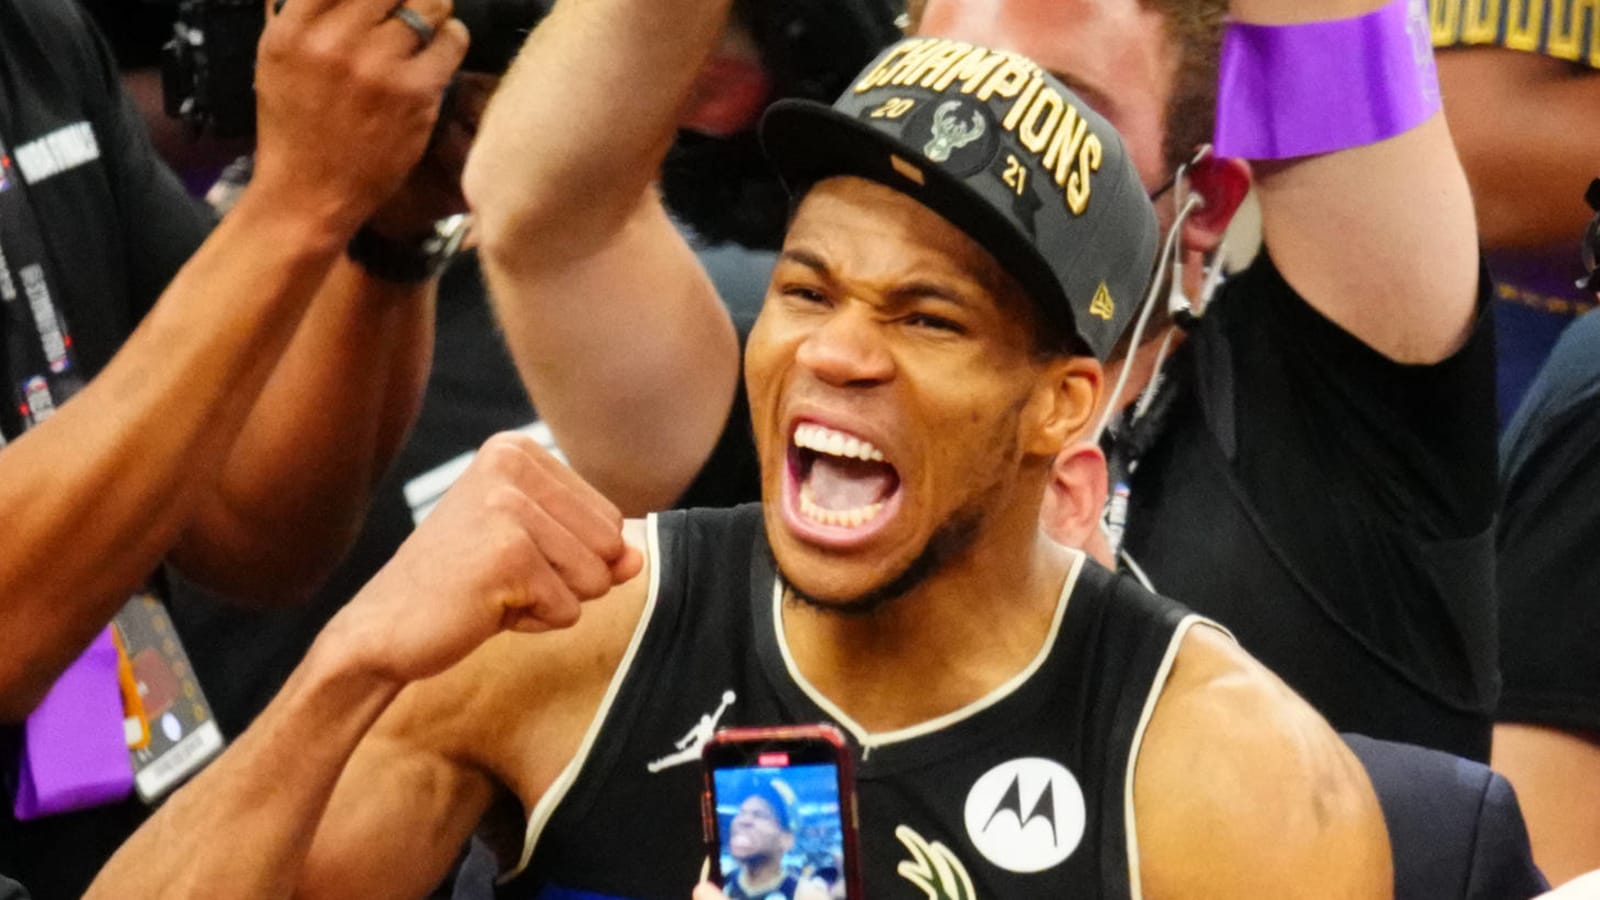 Watch: Giannis Antetokounmpo gets emotional after winning championship